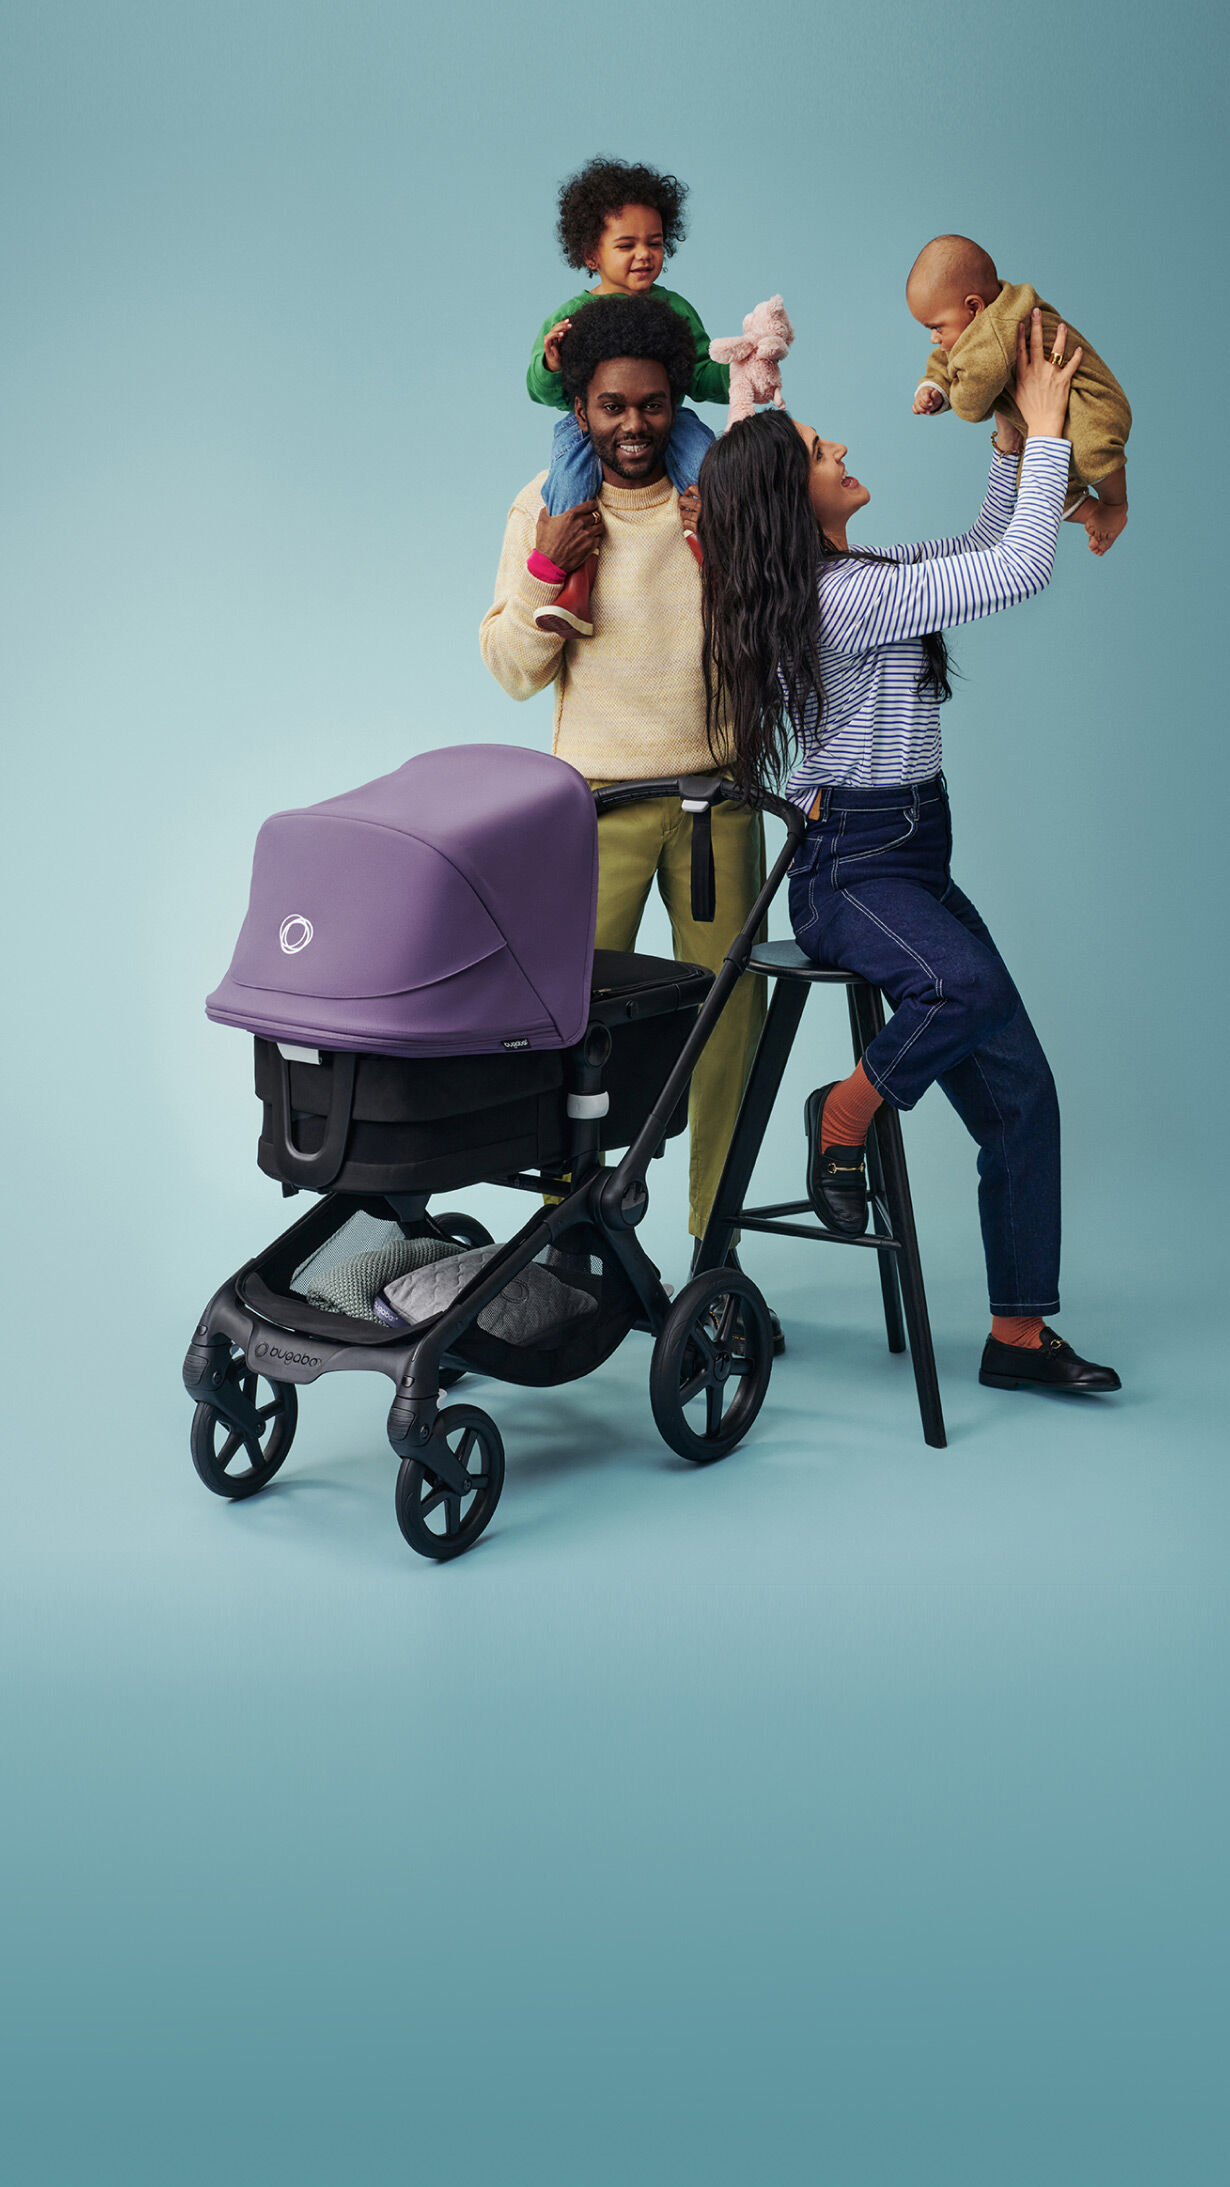 Bugaboo Strollers, Travel Systems, Car Seats & More | Bugaboo